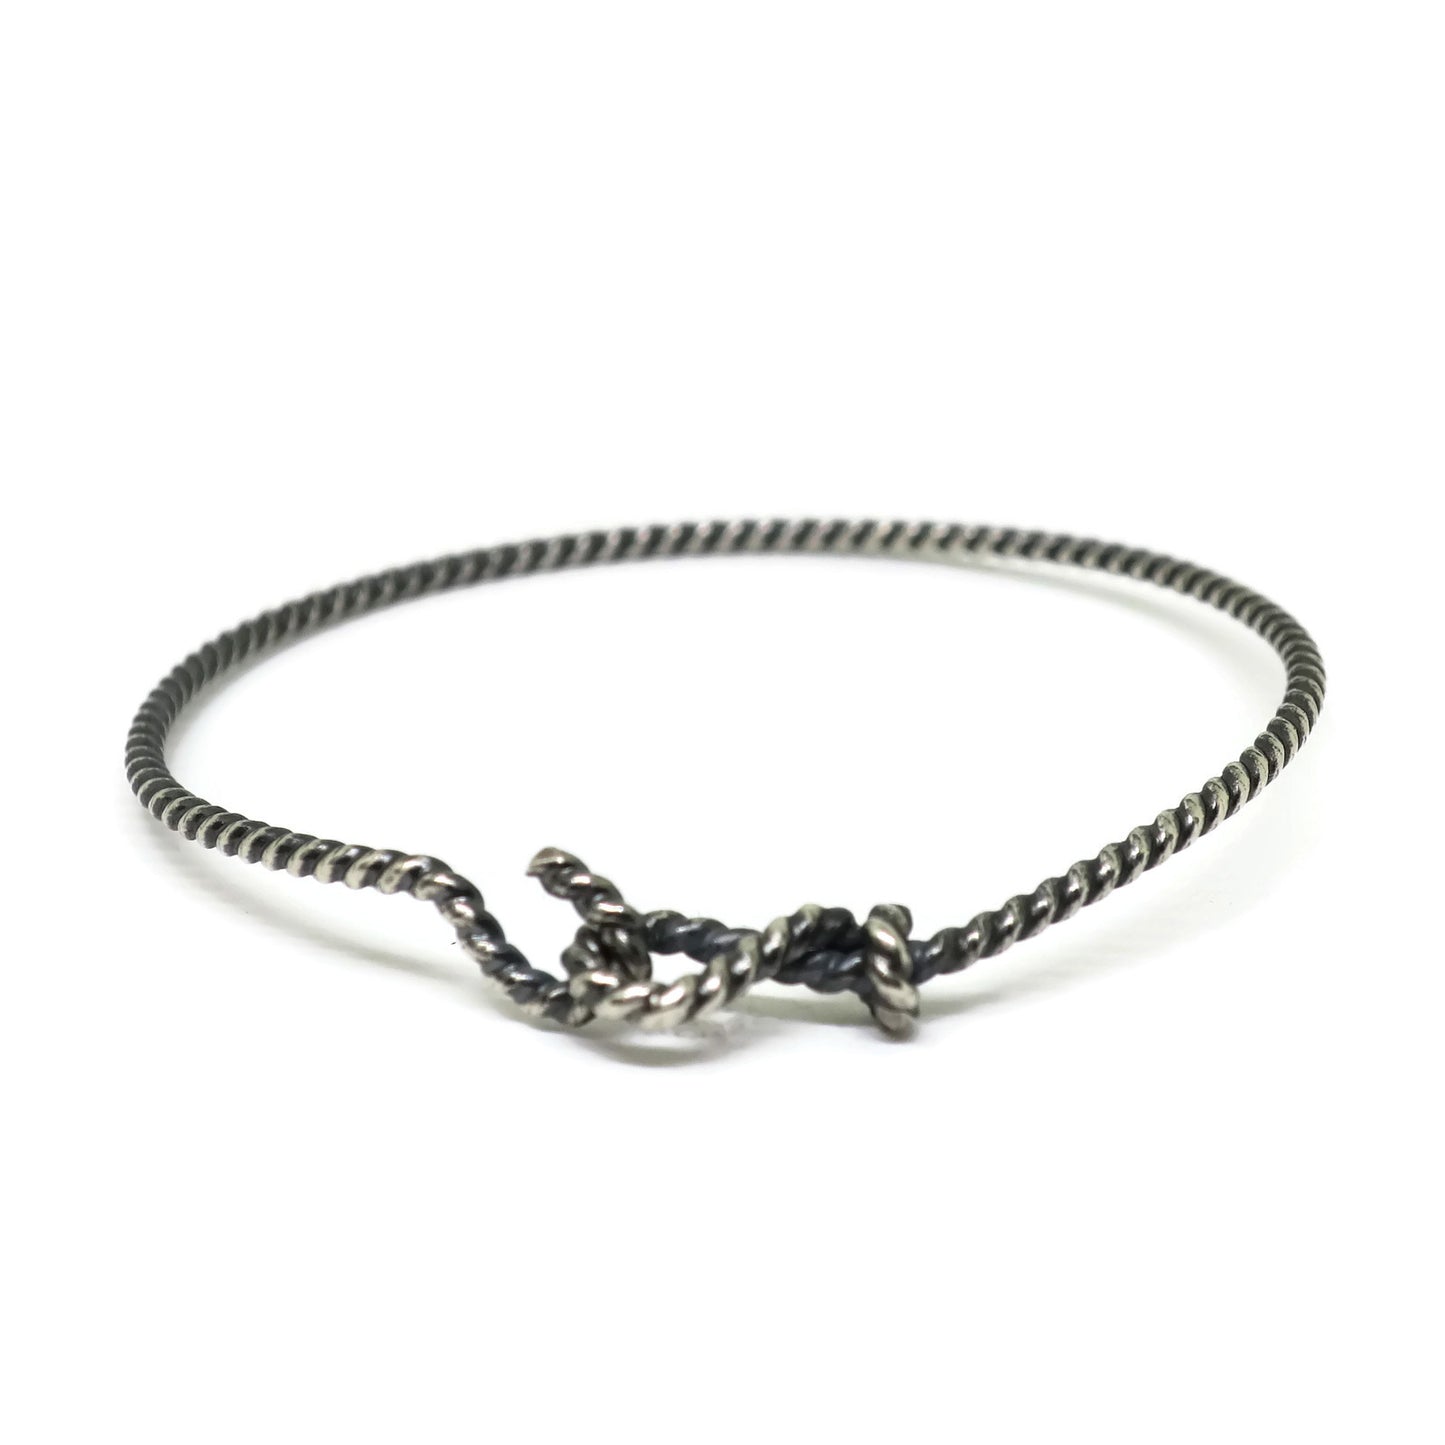 forget-me-knot rope bangle